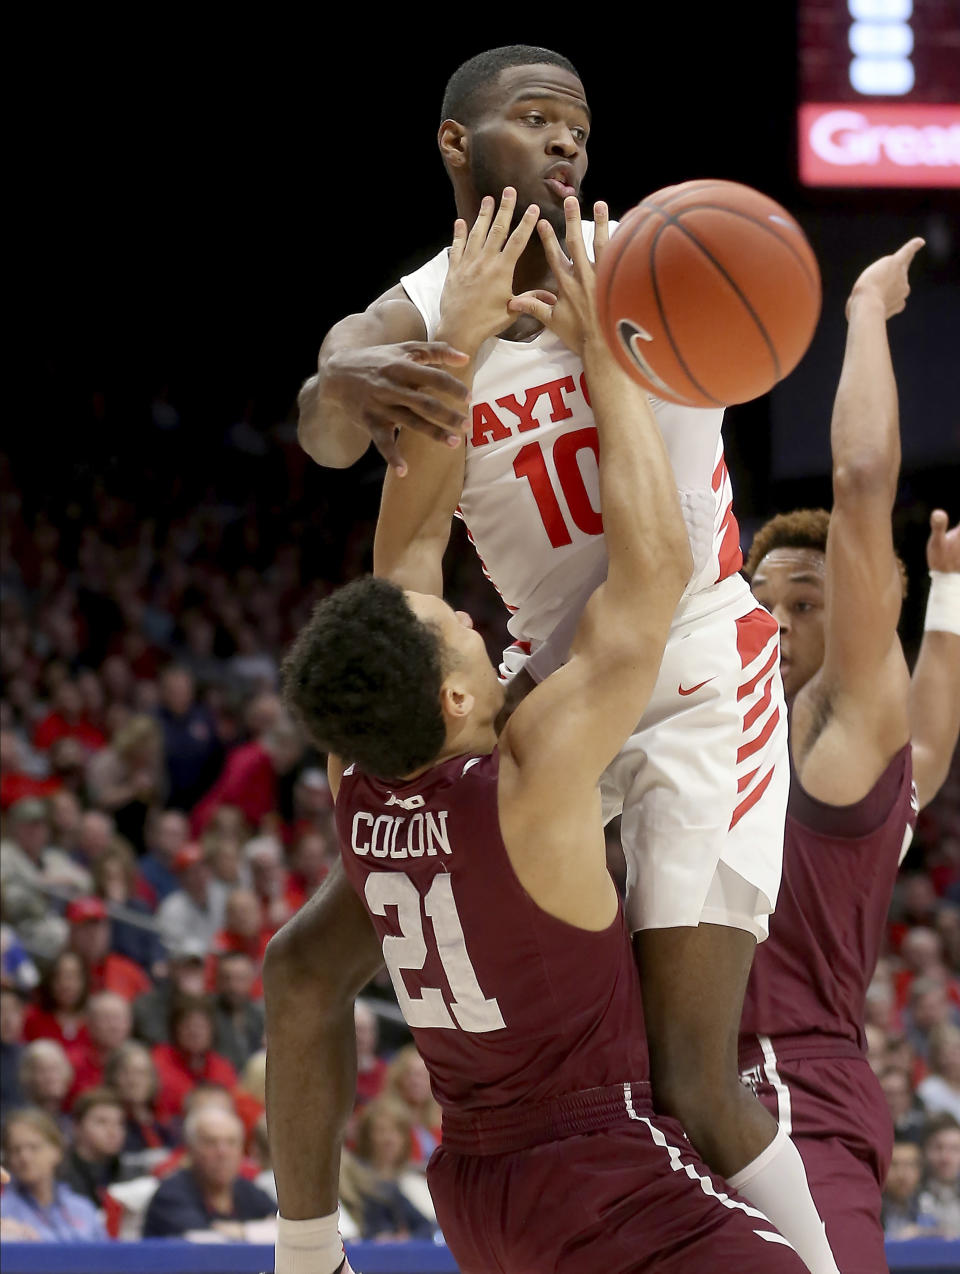 Dayton's Jalen Crutcher (10) passes the ball as he drives to the basket against Fordham's Josh Colon (21) during the first half of an NCAA college basketball game Saturday, Feb. 1, 2020, in Dayton, Ohio. (AP Photo/Tony Tribble)